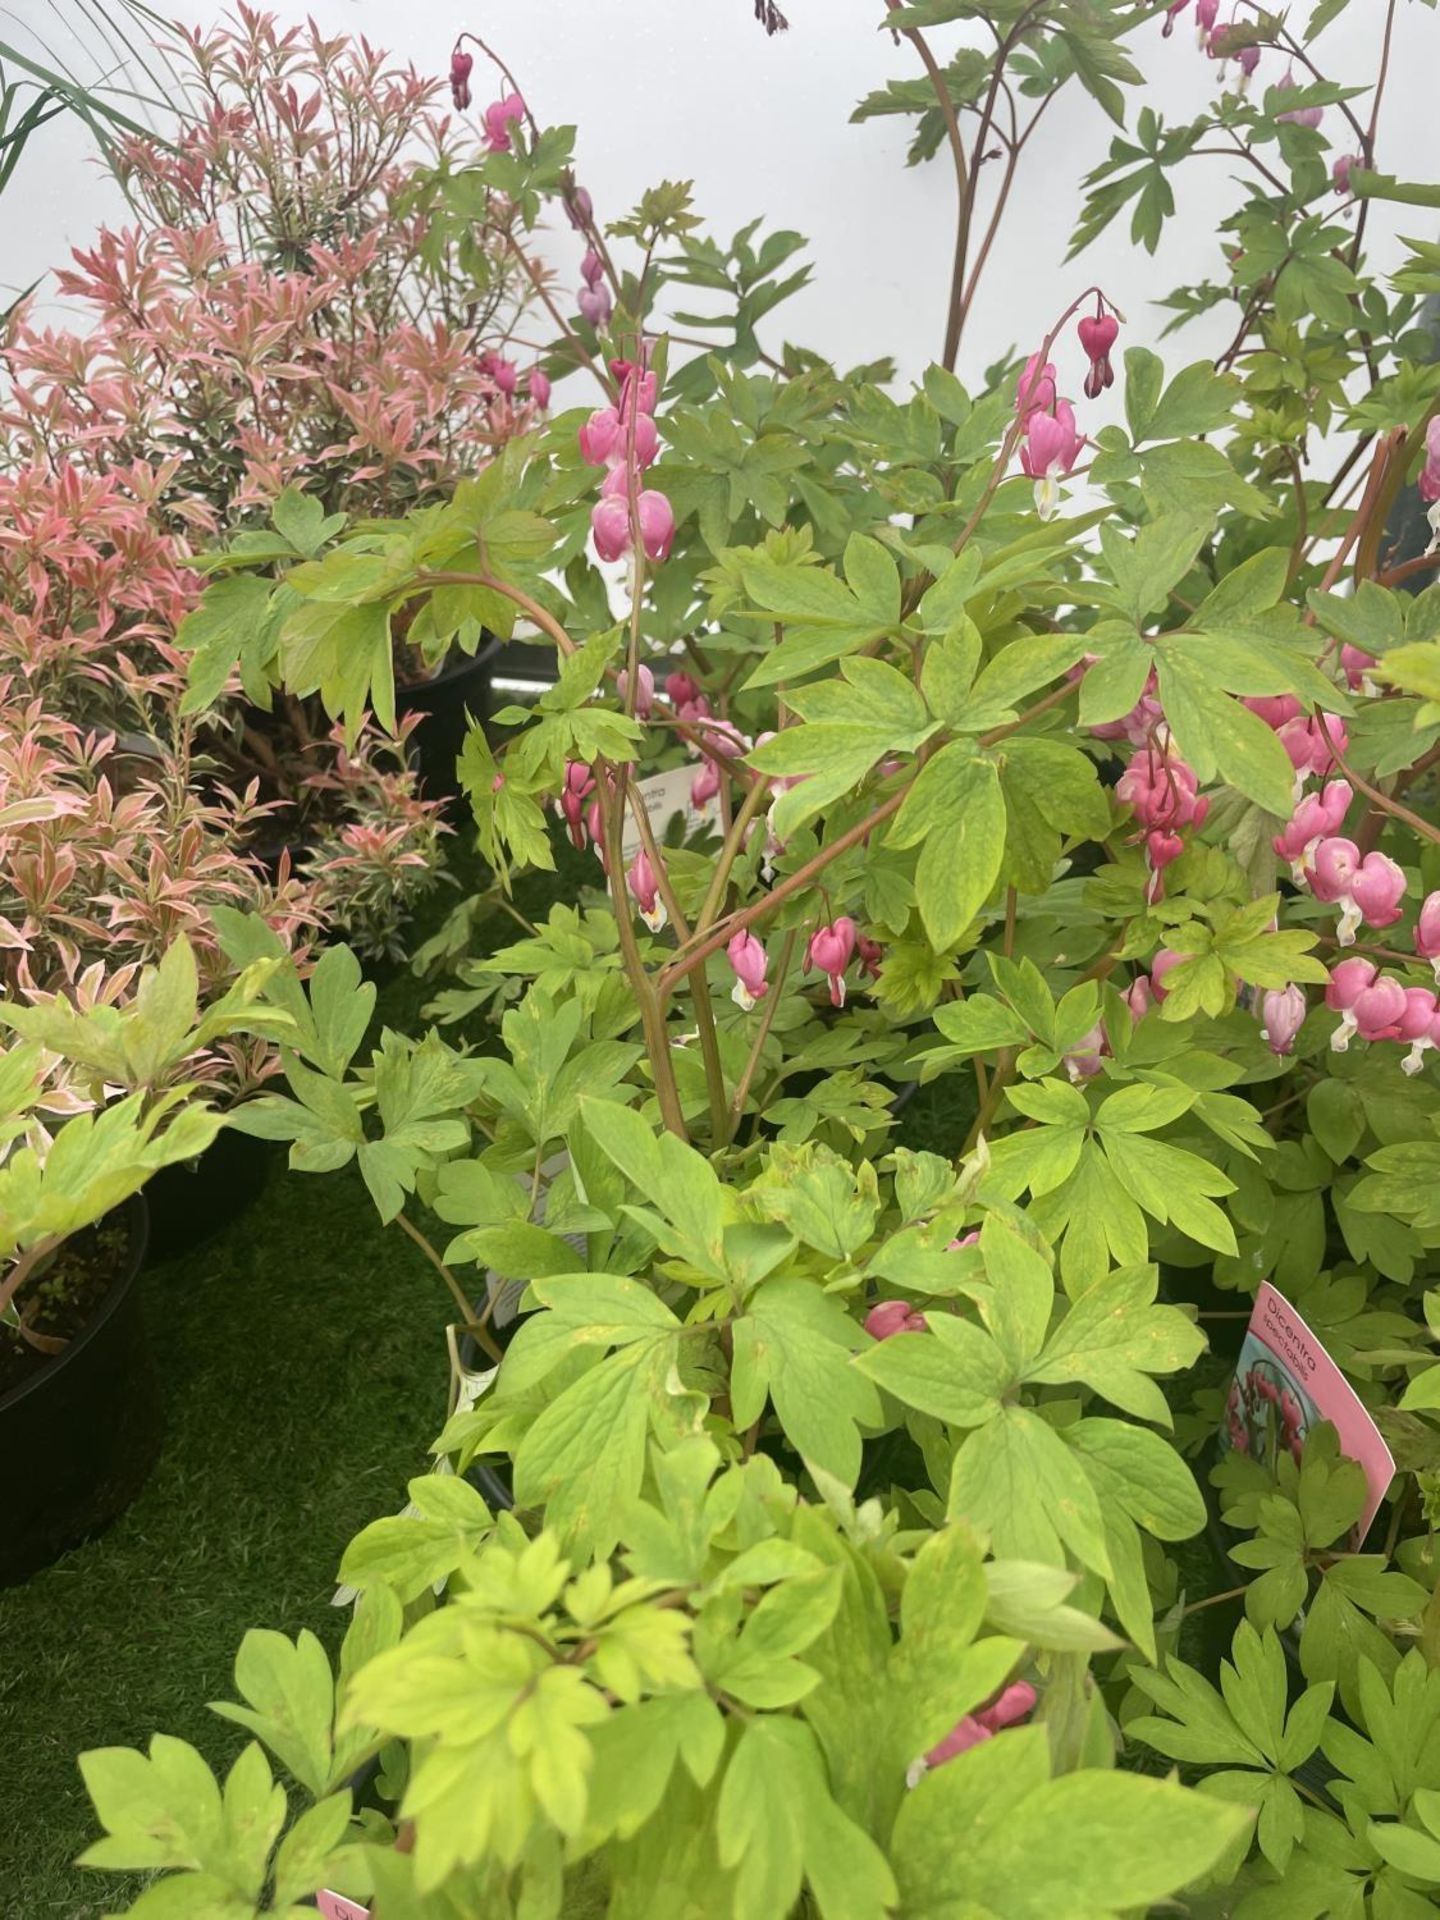 SIX DICENTRA SPECTABILIS BLEEDING HEART 50CM TALL IN 2 LTR POTS TO BE SOLD FOR THE SIX PLUS VAT - Image 3 of 11